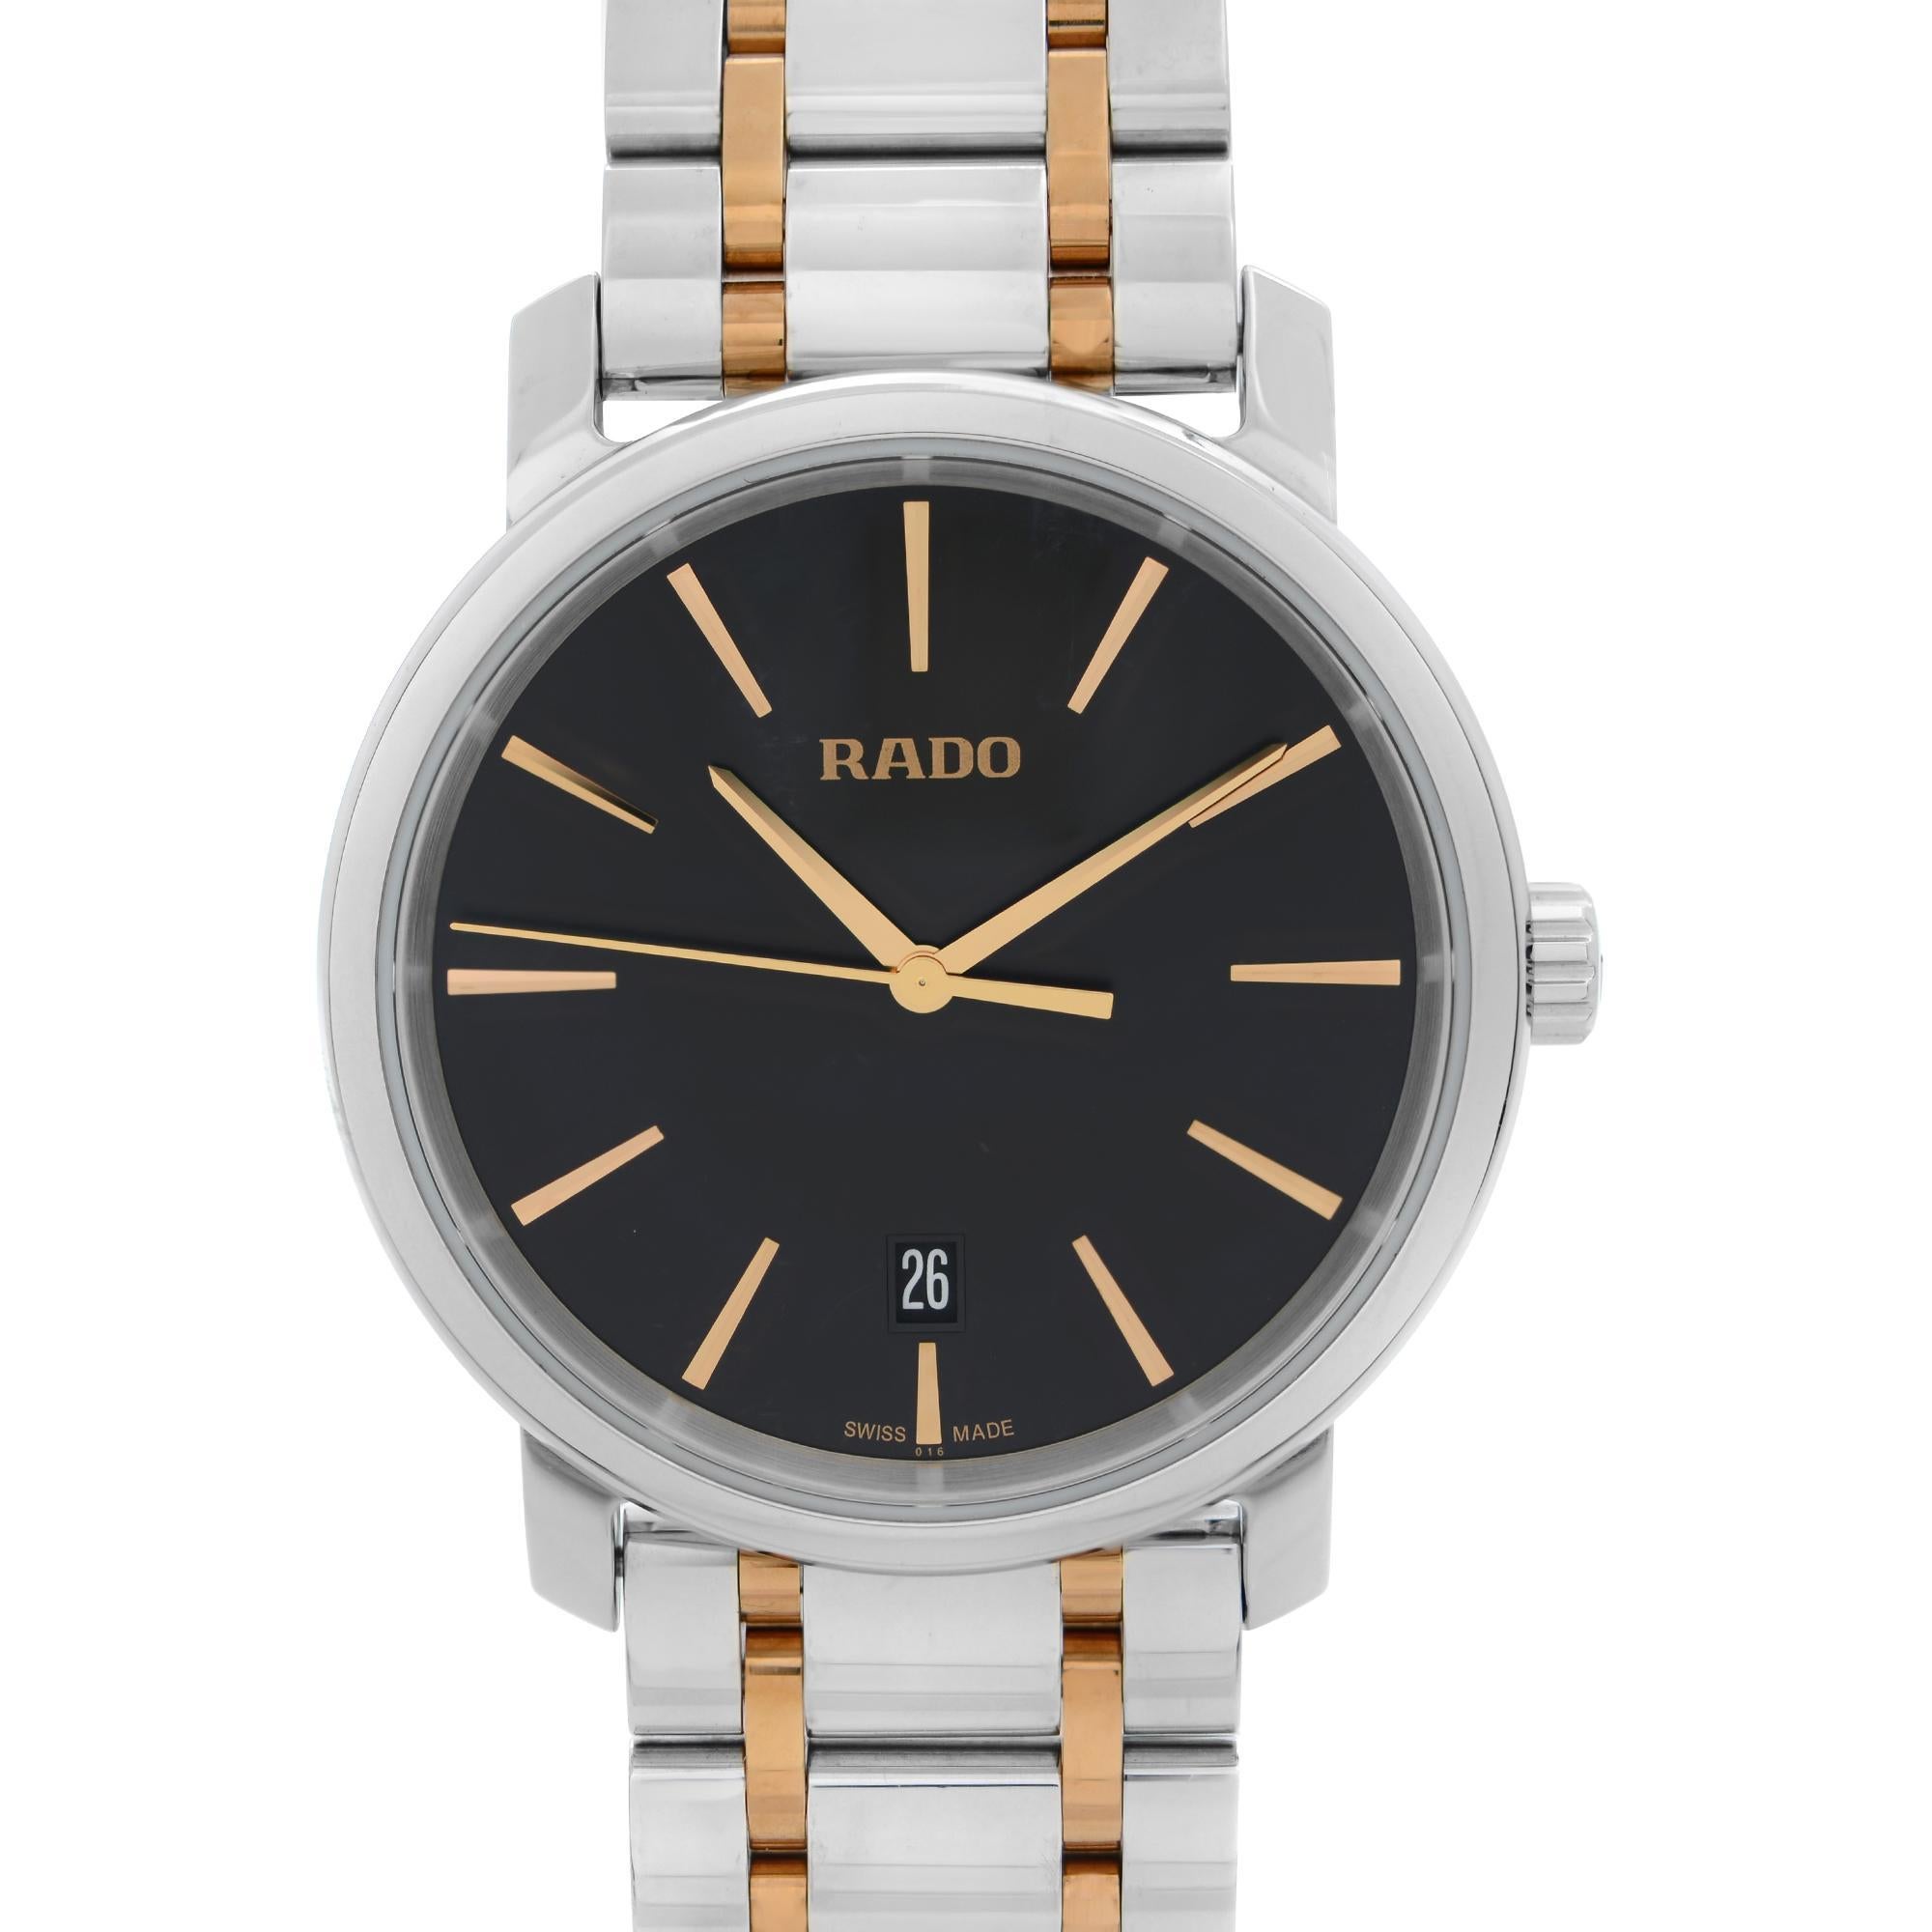 Display Model Rado DiaMaster Two-Tone Stainless Steel Black Dial Quartz Men's Watch R14078163. This Beautiful Timepiece is Powered by a Quartz (Battery) Movement and Features: Ceramic  Case with a Two-Tone Stainless Steel and Ceramic, Fixed Bezel.